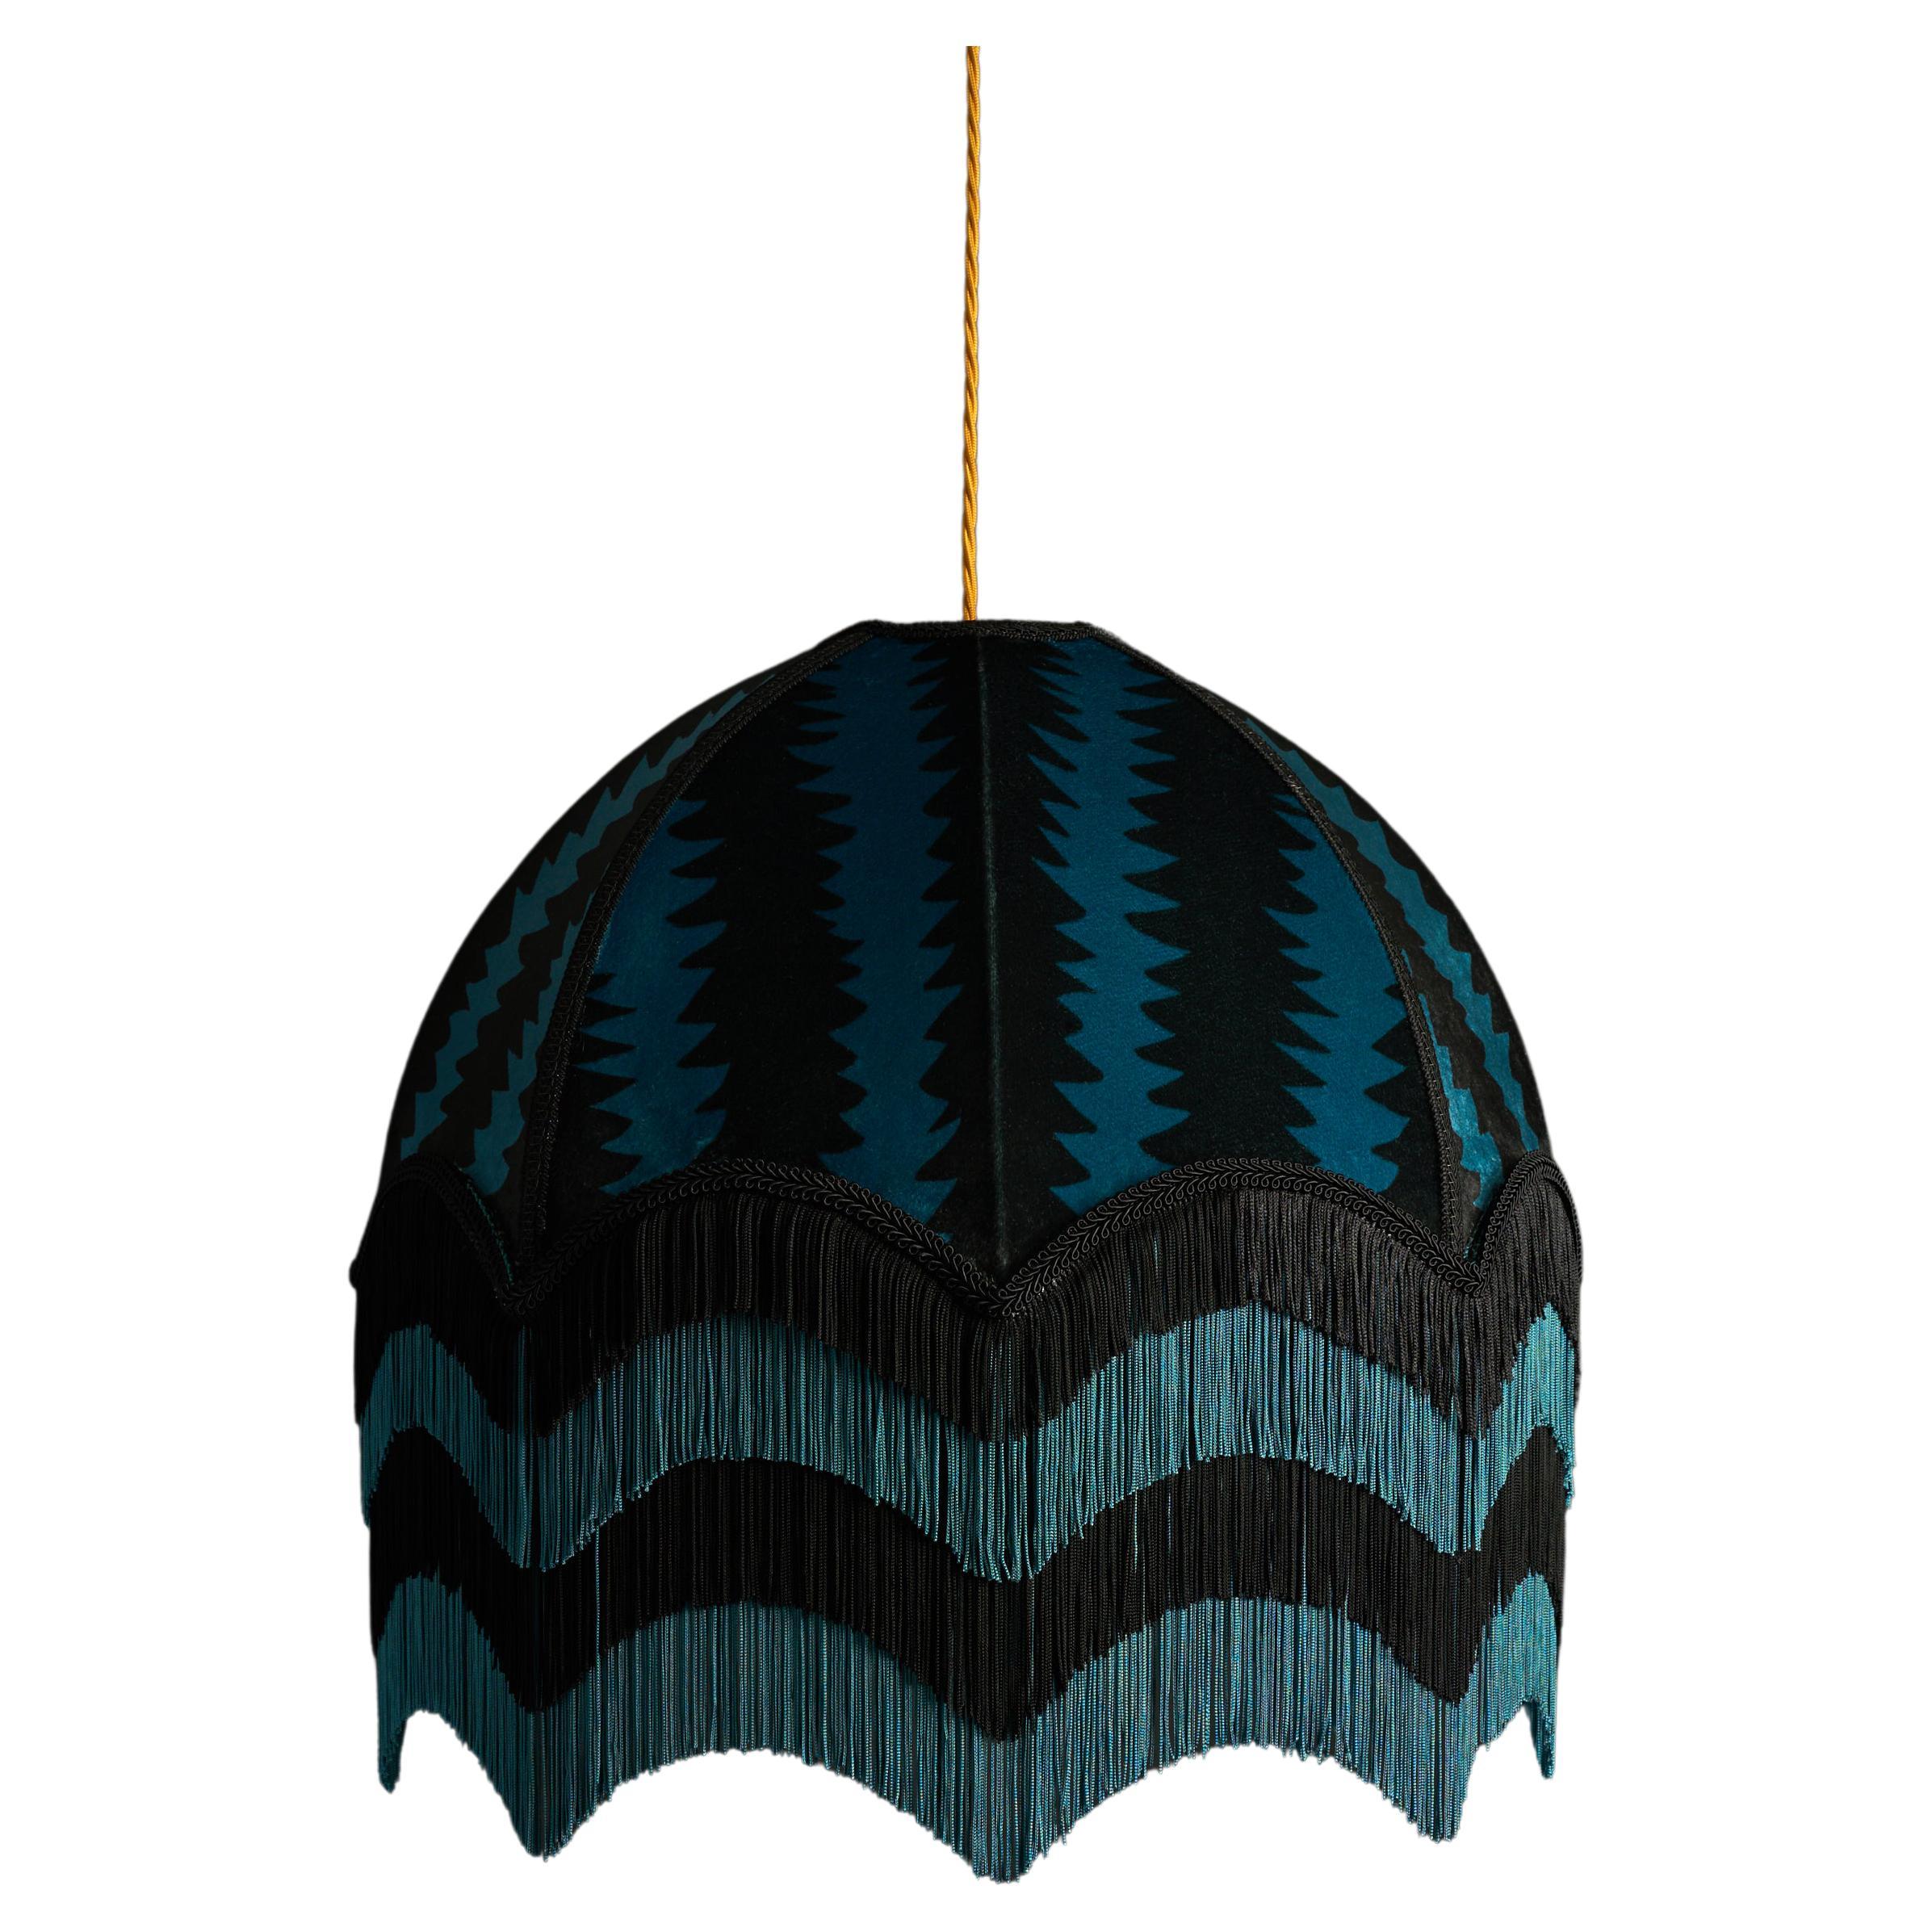 Fitz Lampshade with Fringing - Small (14") For Sale